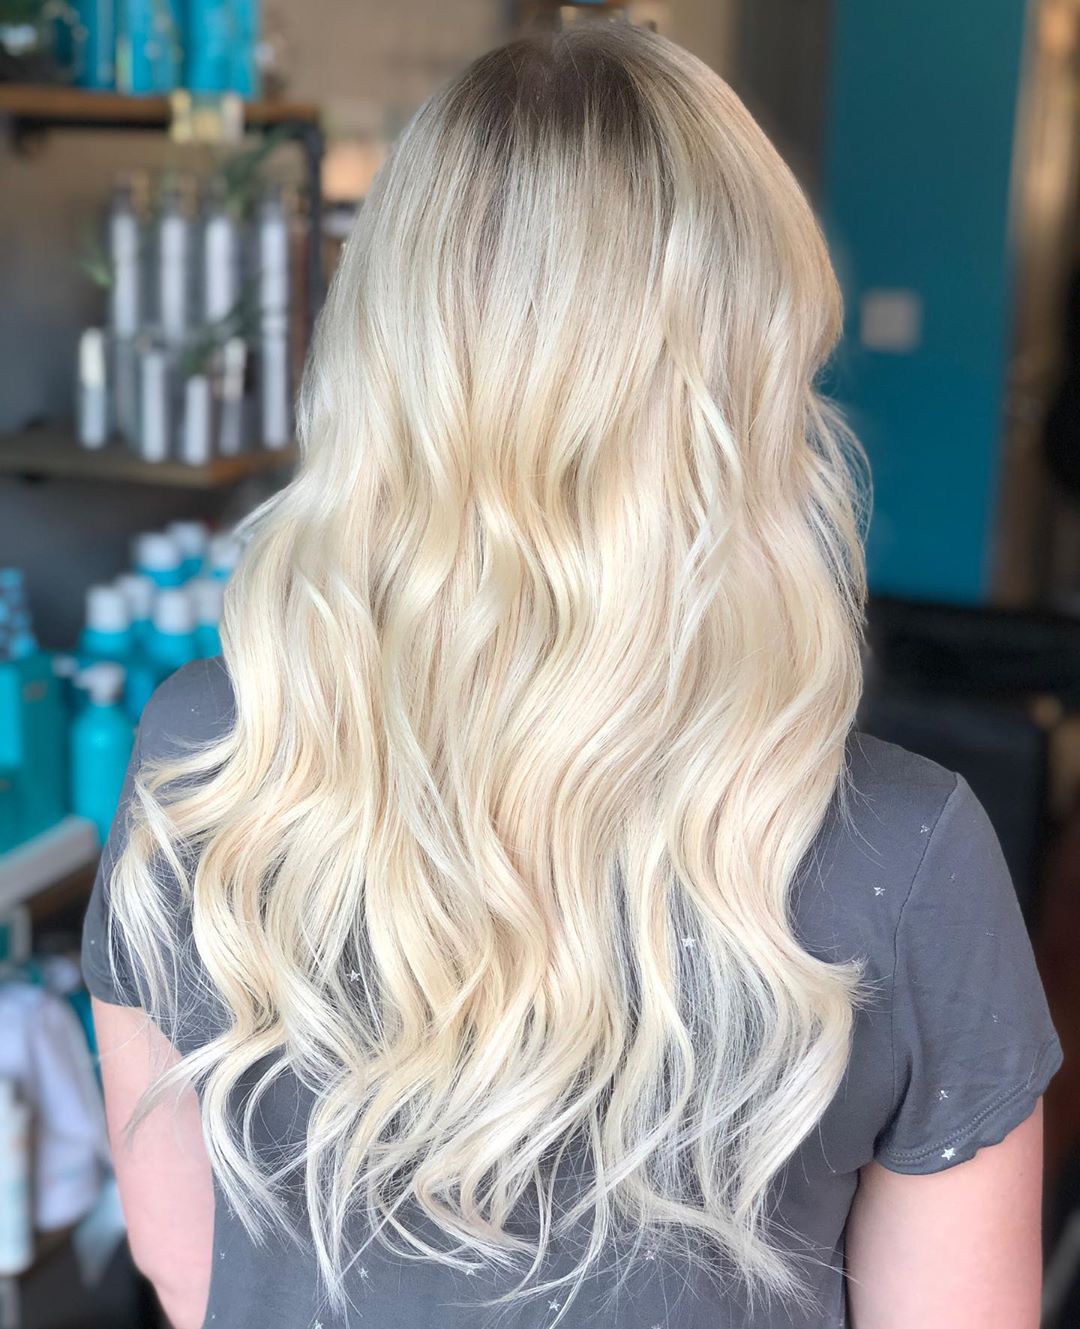 balayage ombre hairstyles 3 9 New Blonde Balayage Hairstyles You'll Love!